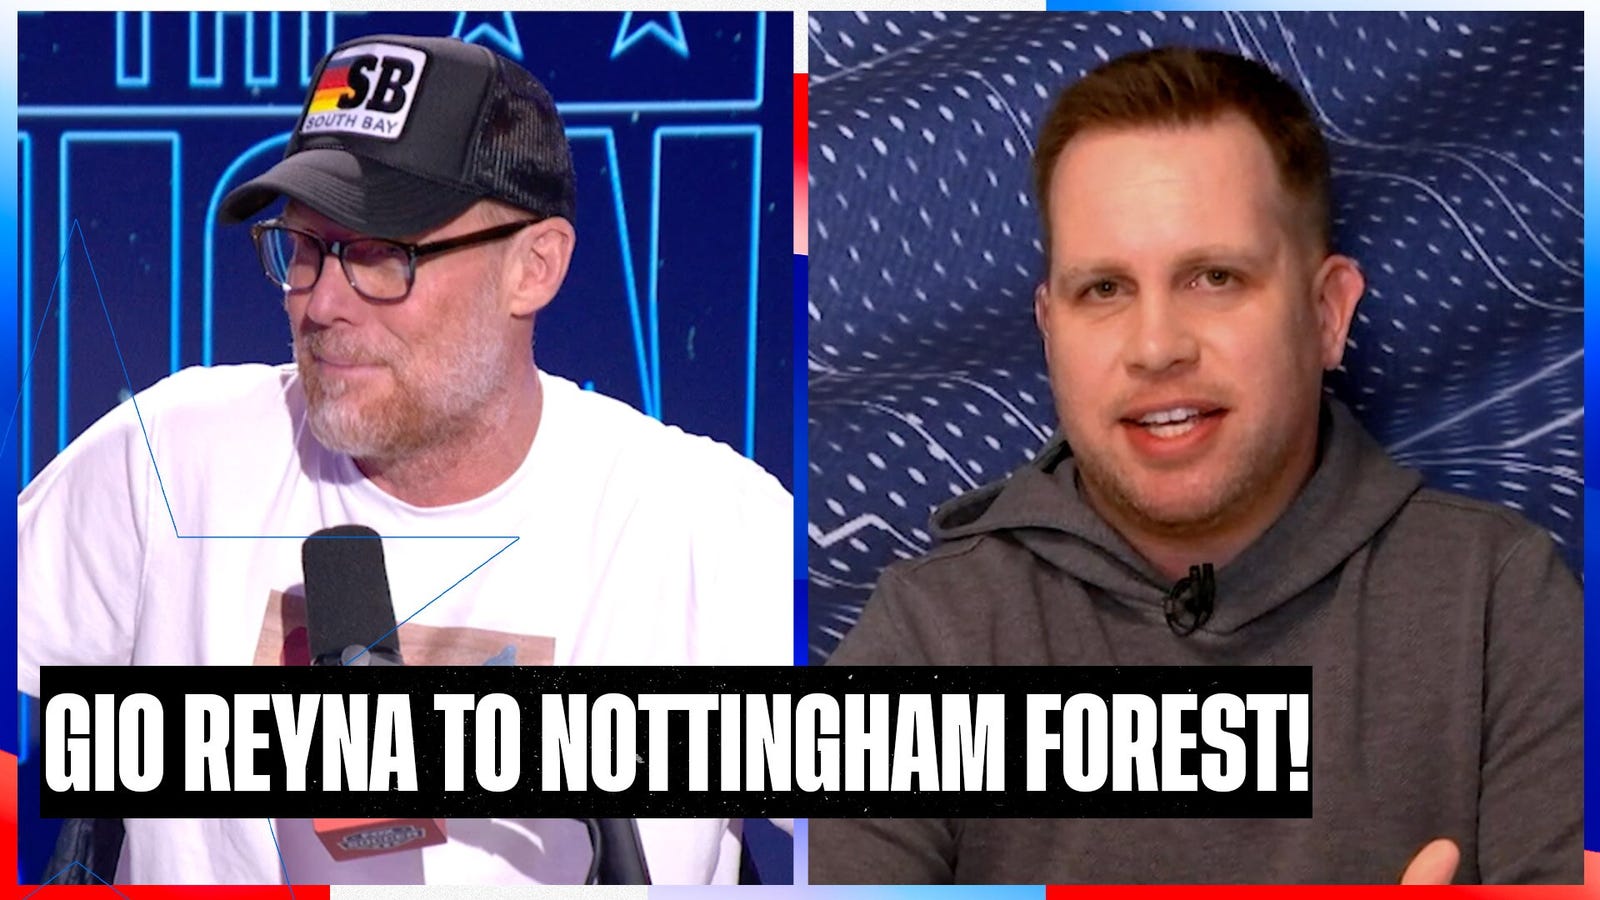 Alexi Lalas reacts to Gio Reyna transferring to Nottingham Forest